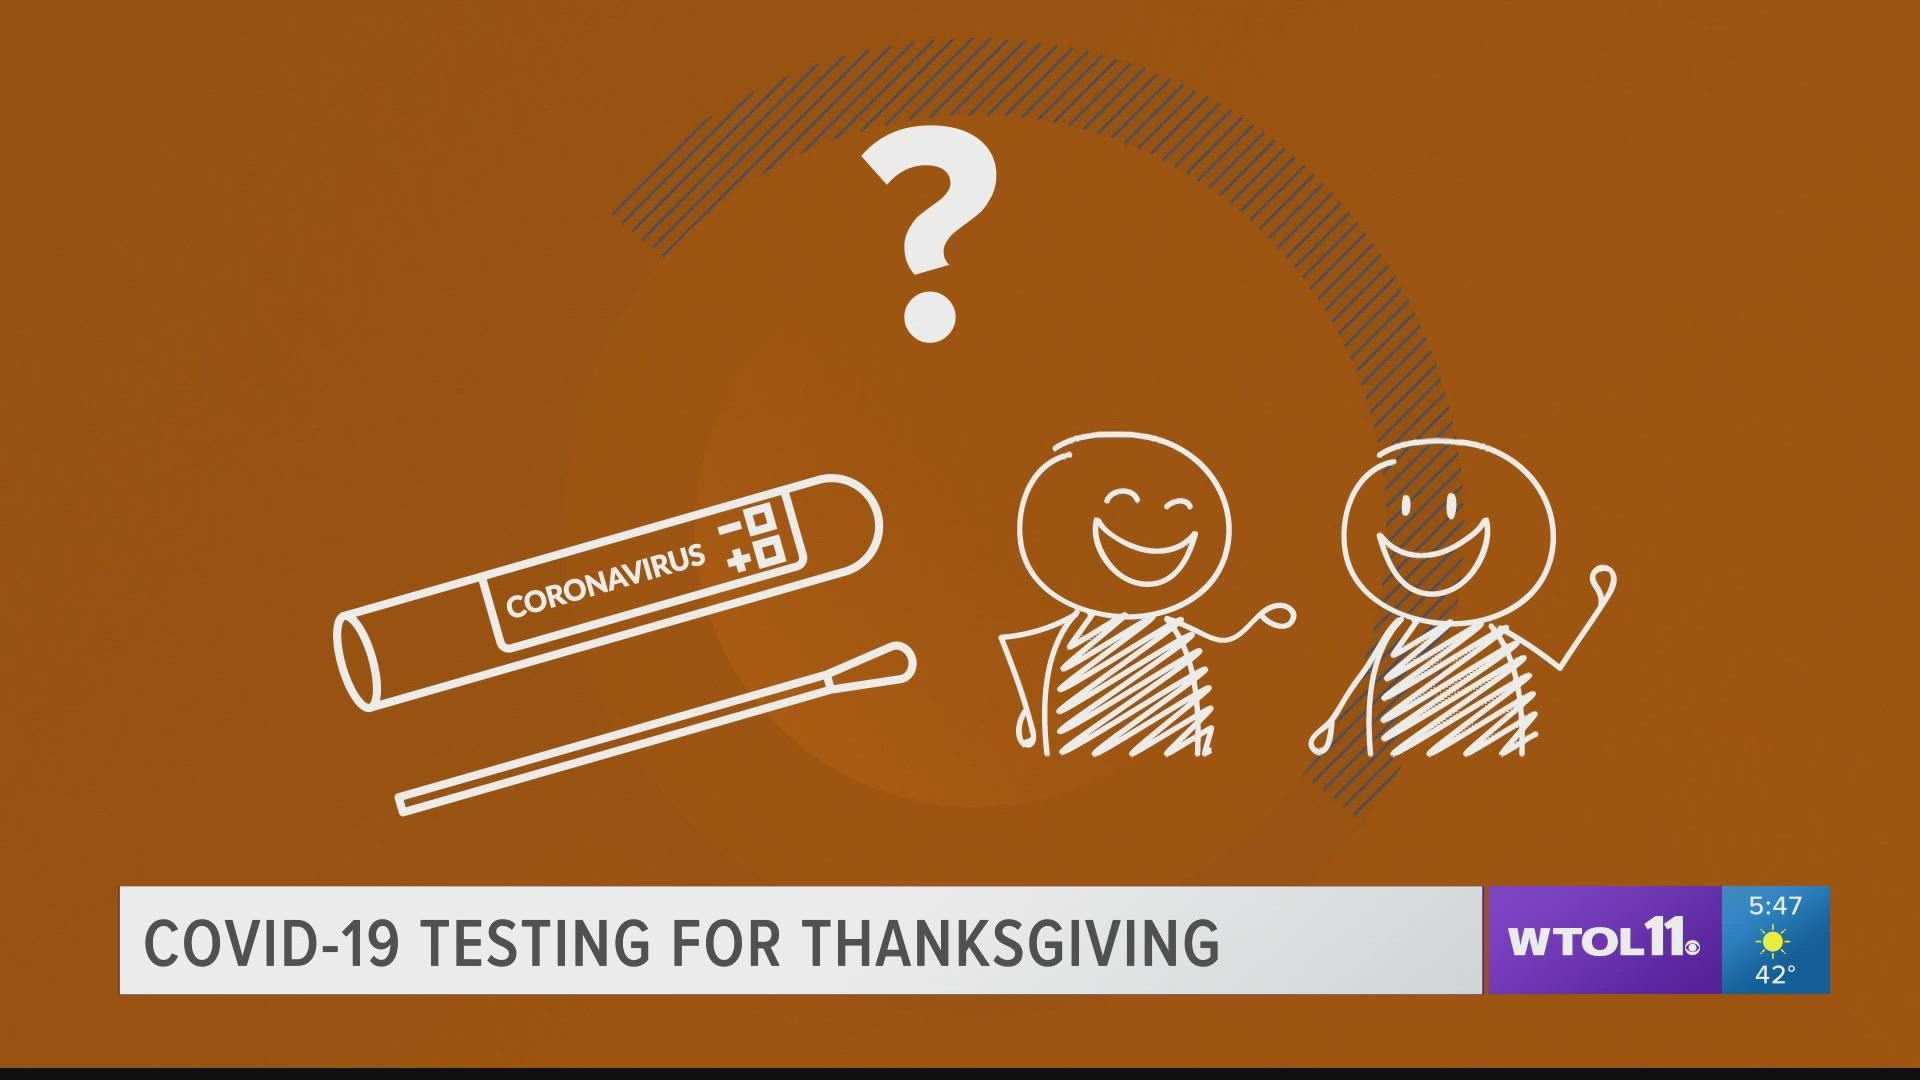 Tests will be available next week before Thanksgiving in an effort to minimize spread of the virus.